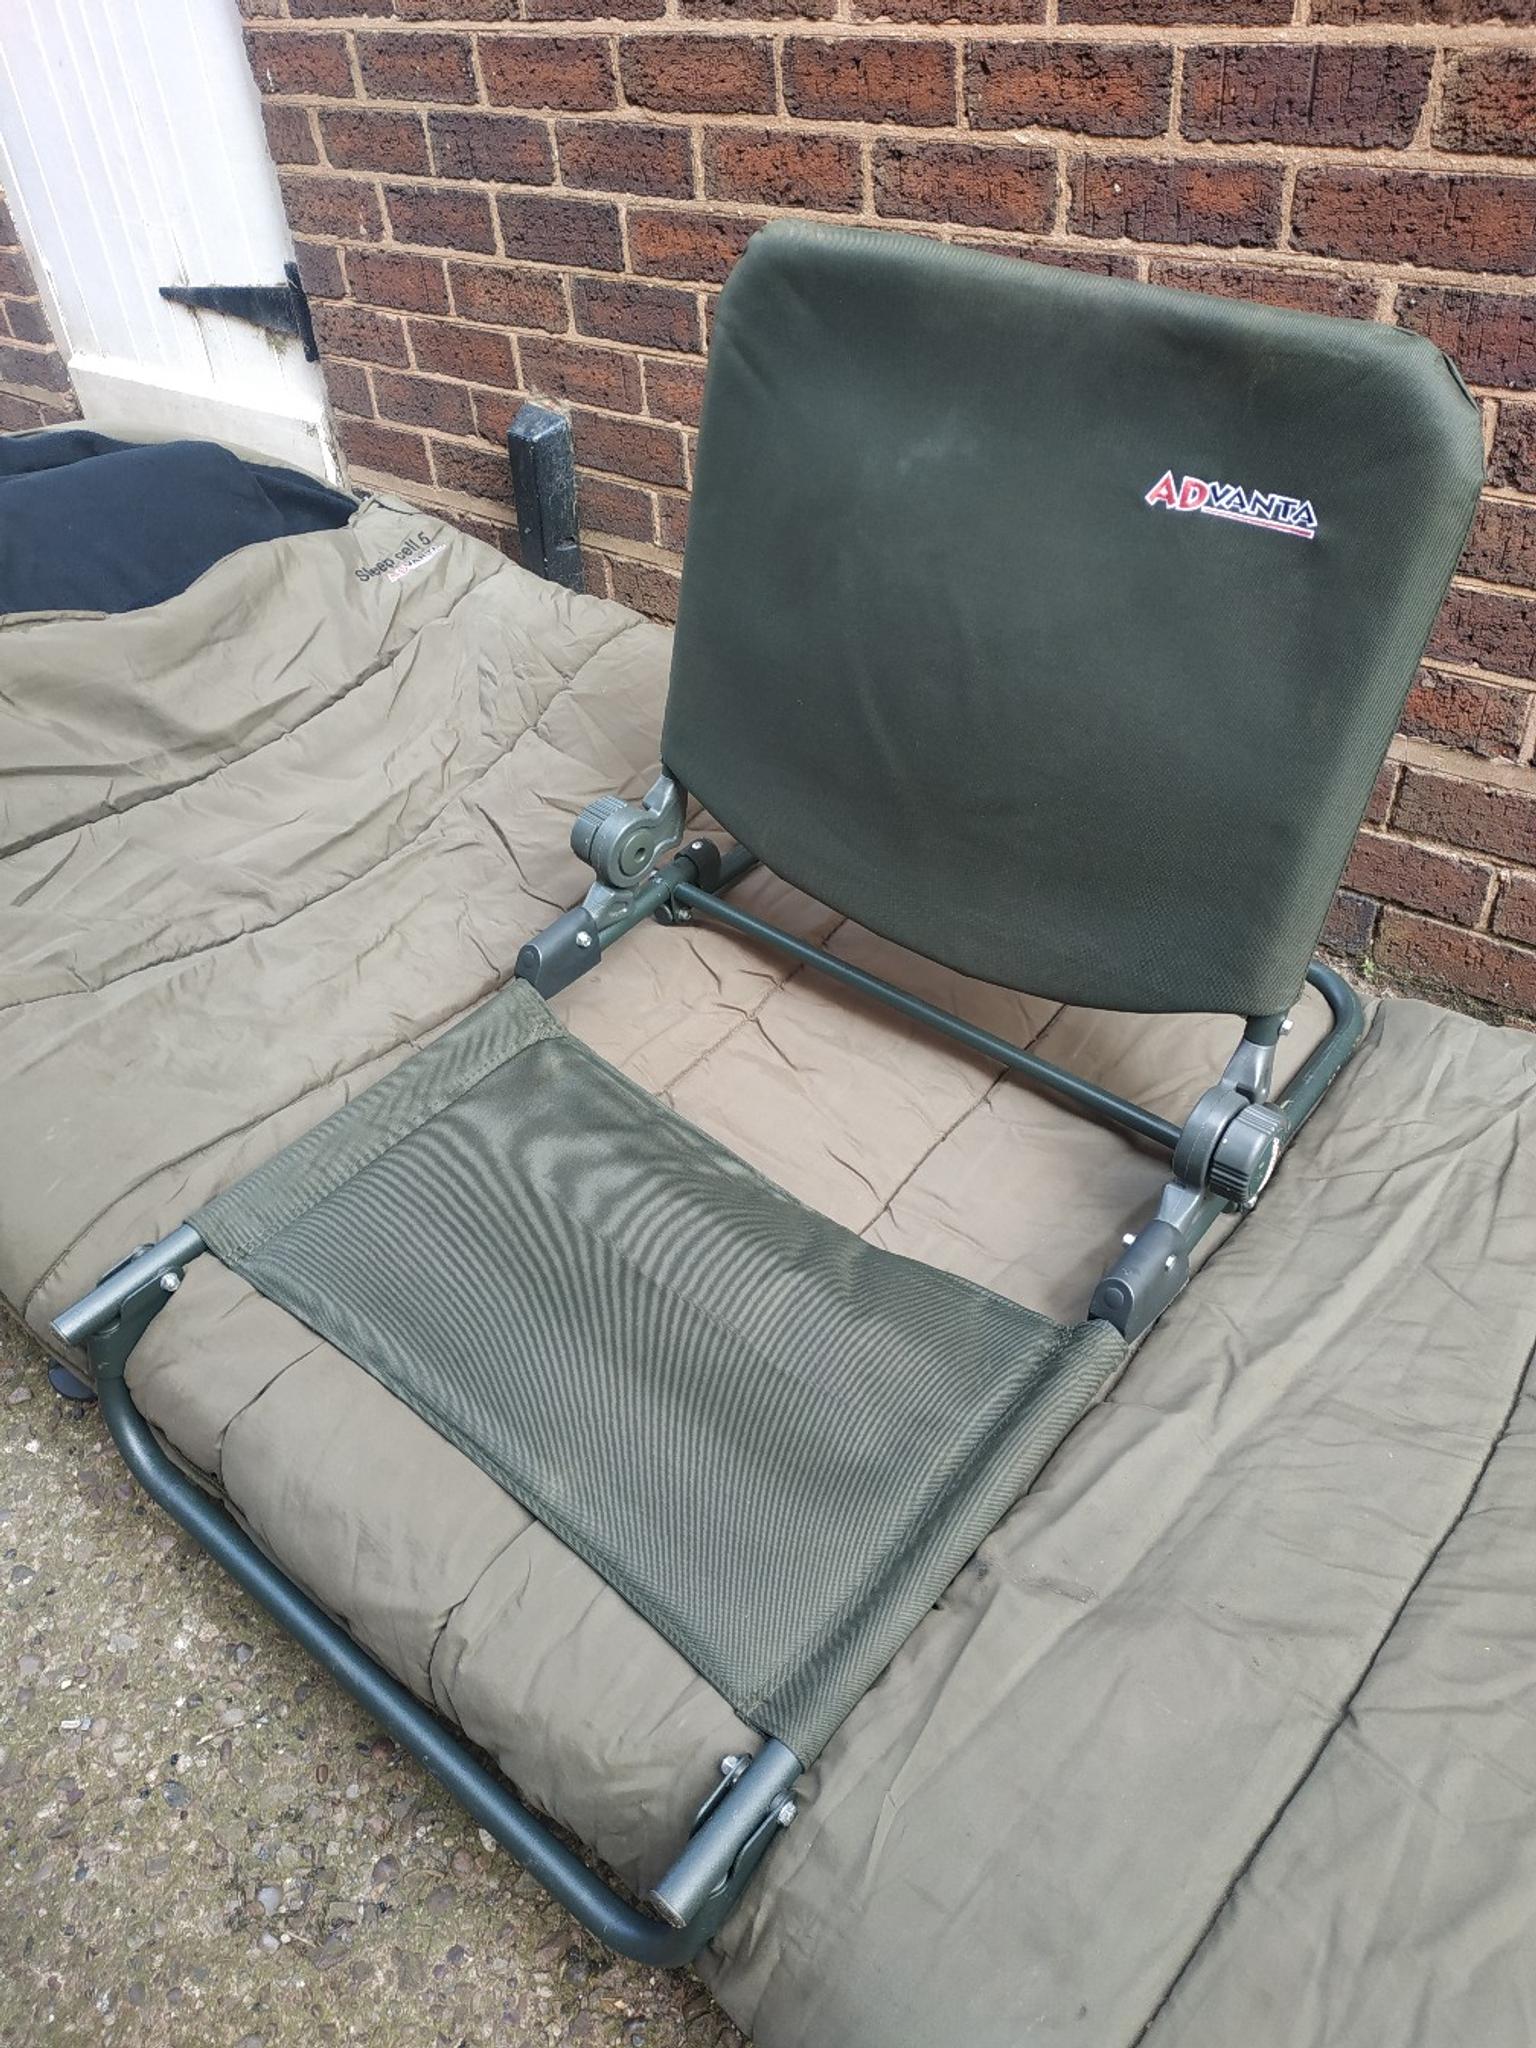 Bed Chair Buddy Carp Fishing Adjustable In Dy8 Dudley For 20 00 For Sale Shpock